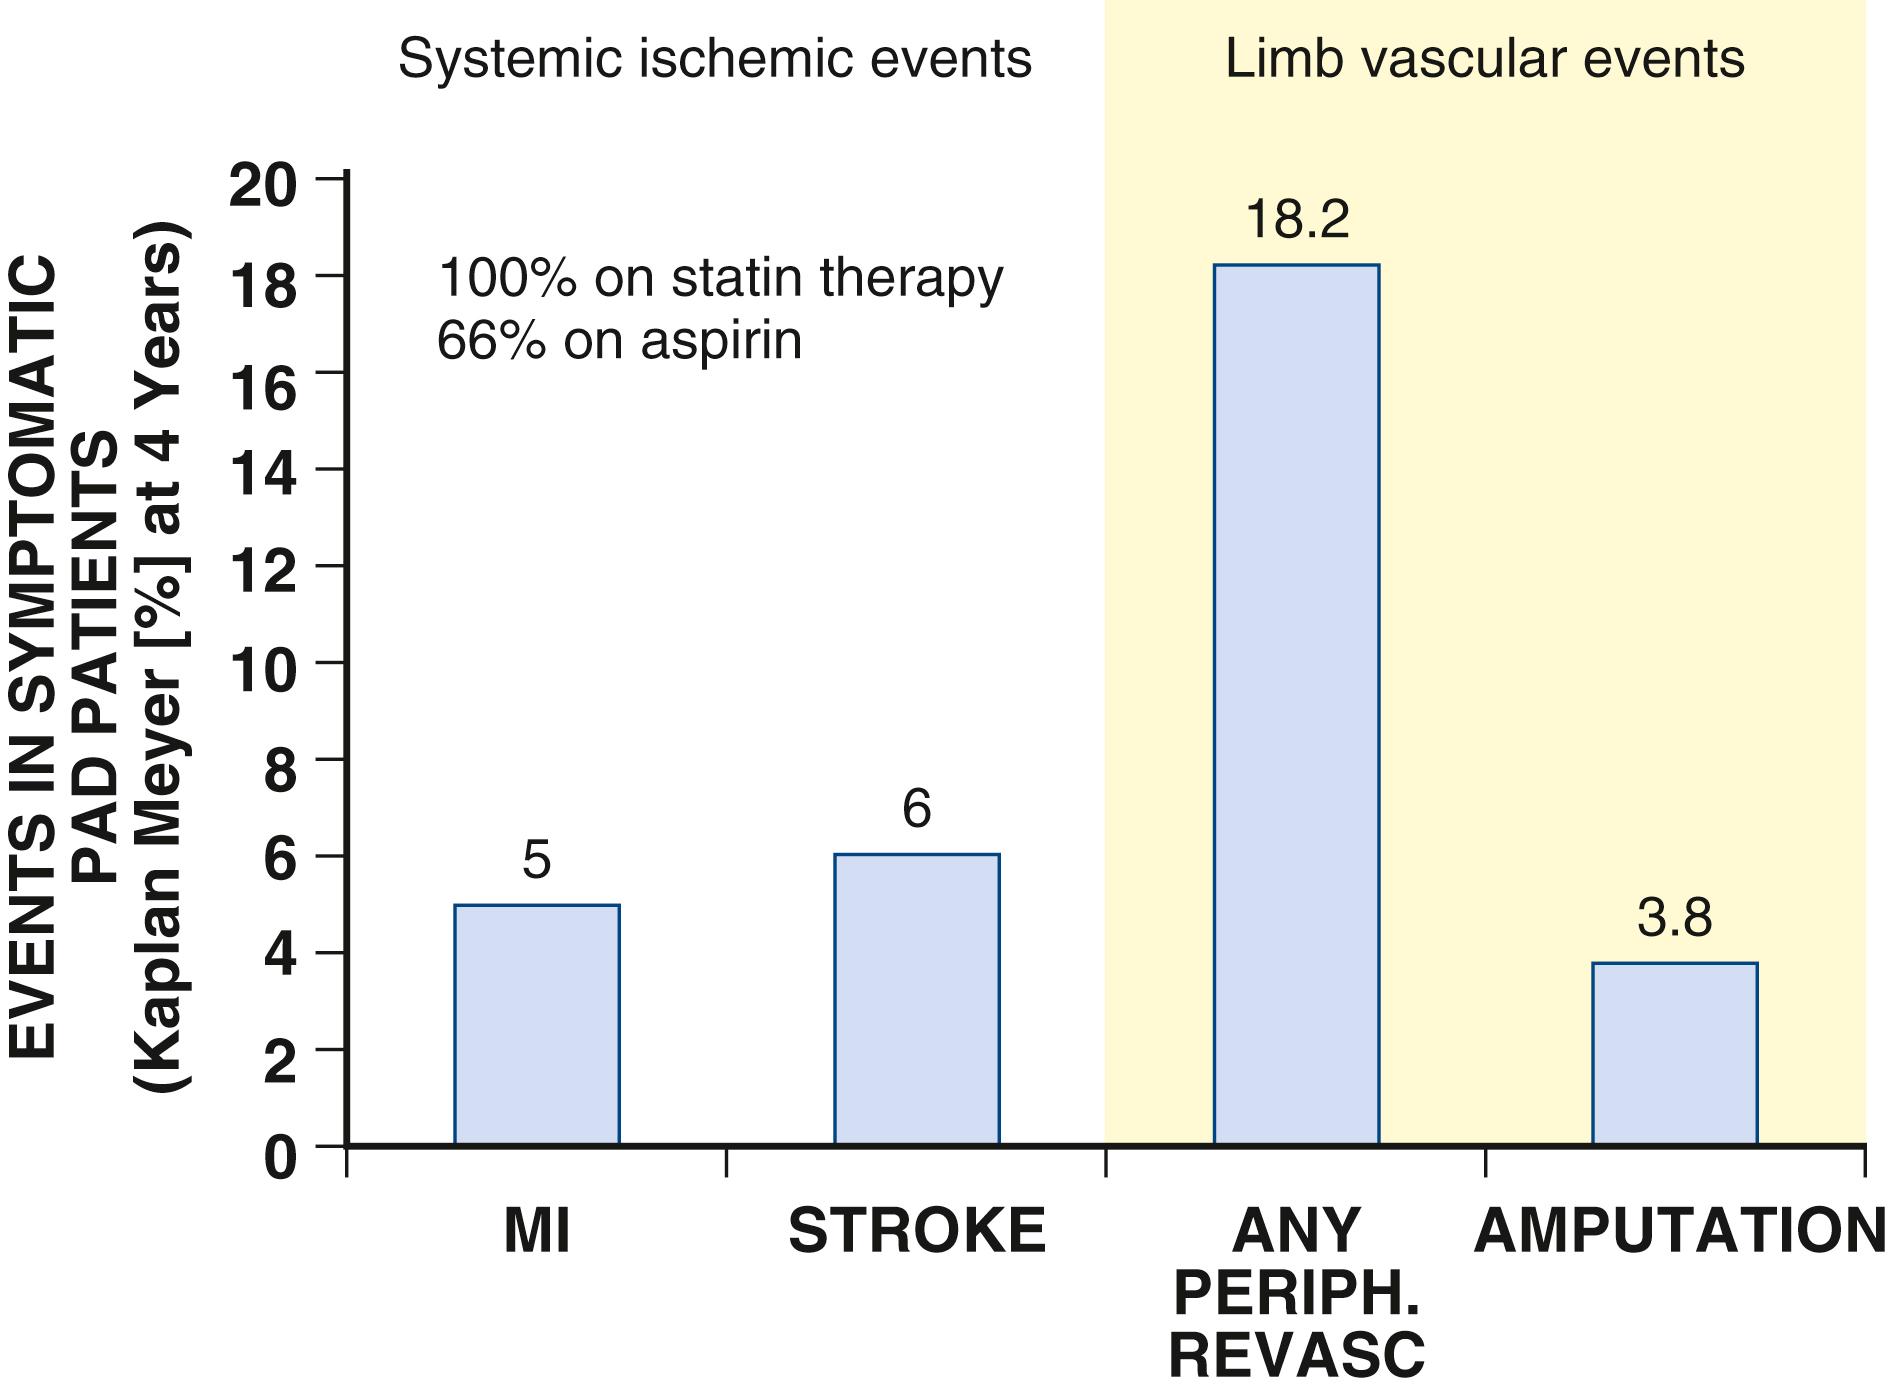 FIGURE 43.9, Event rates in patients with PAD at 4 years in the REACH registry.